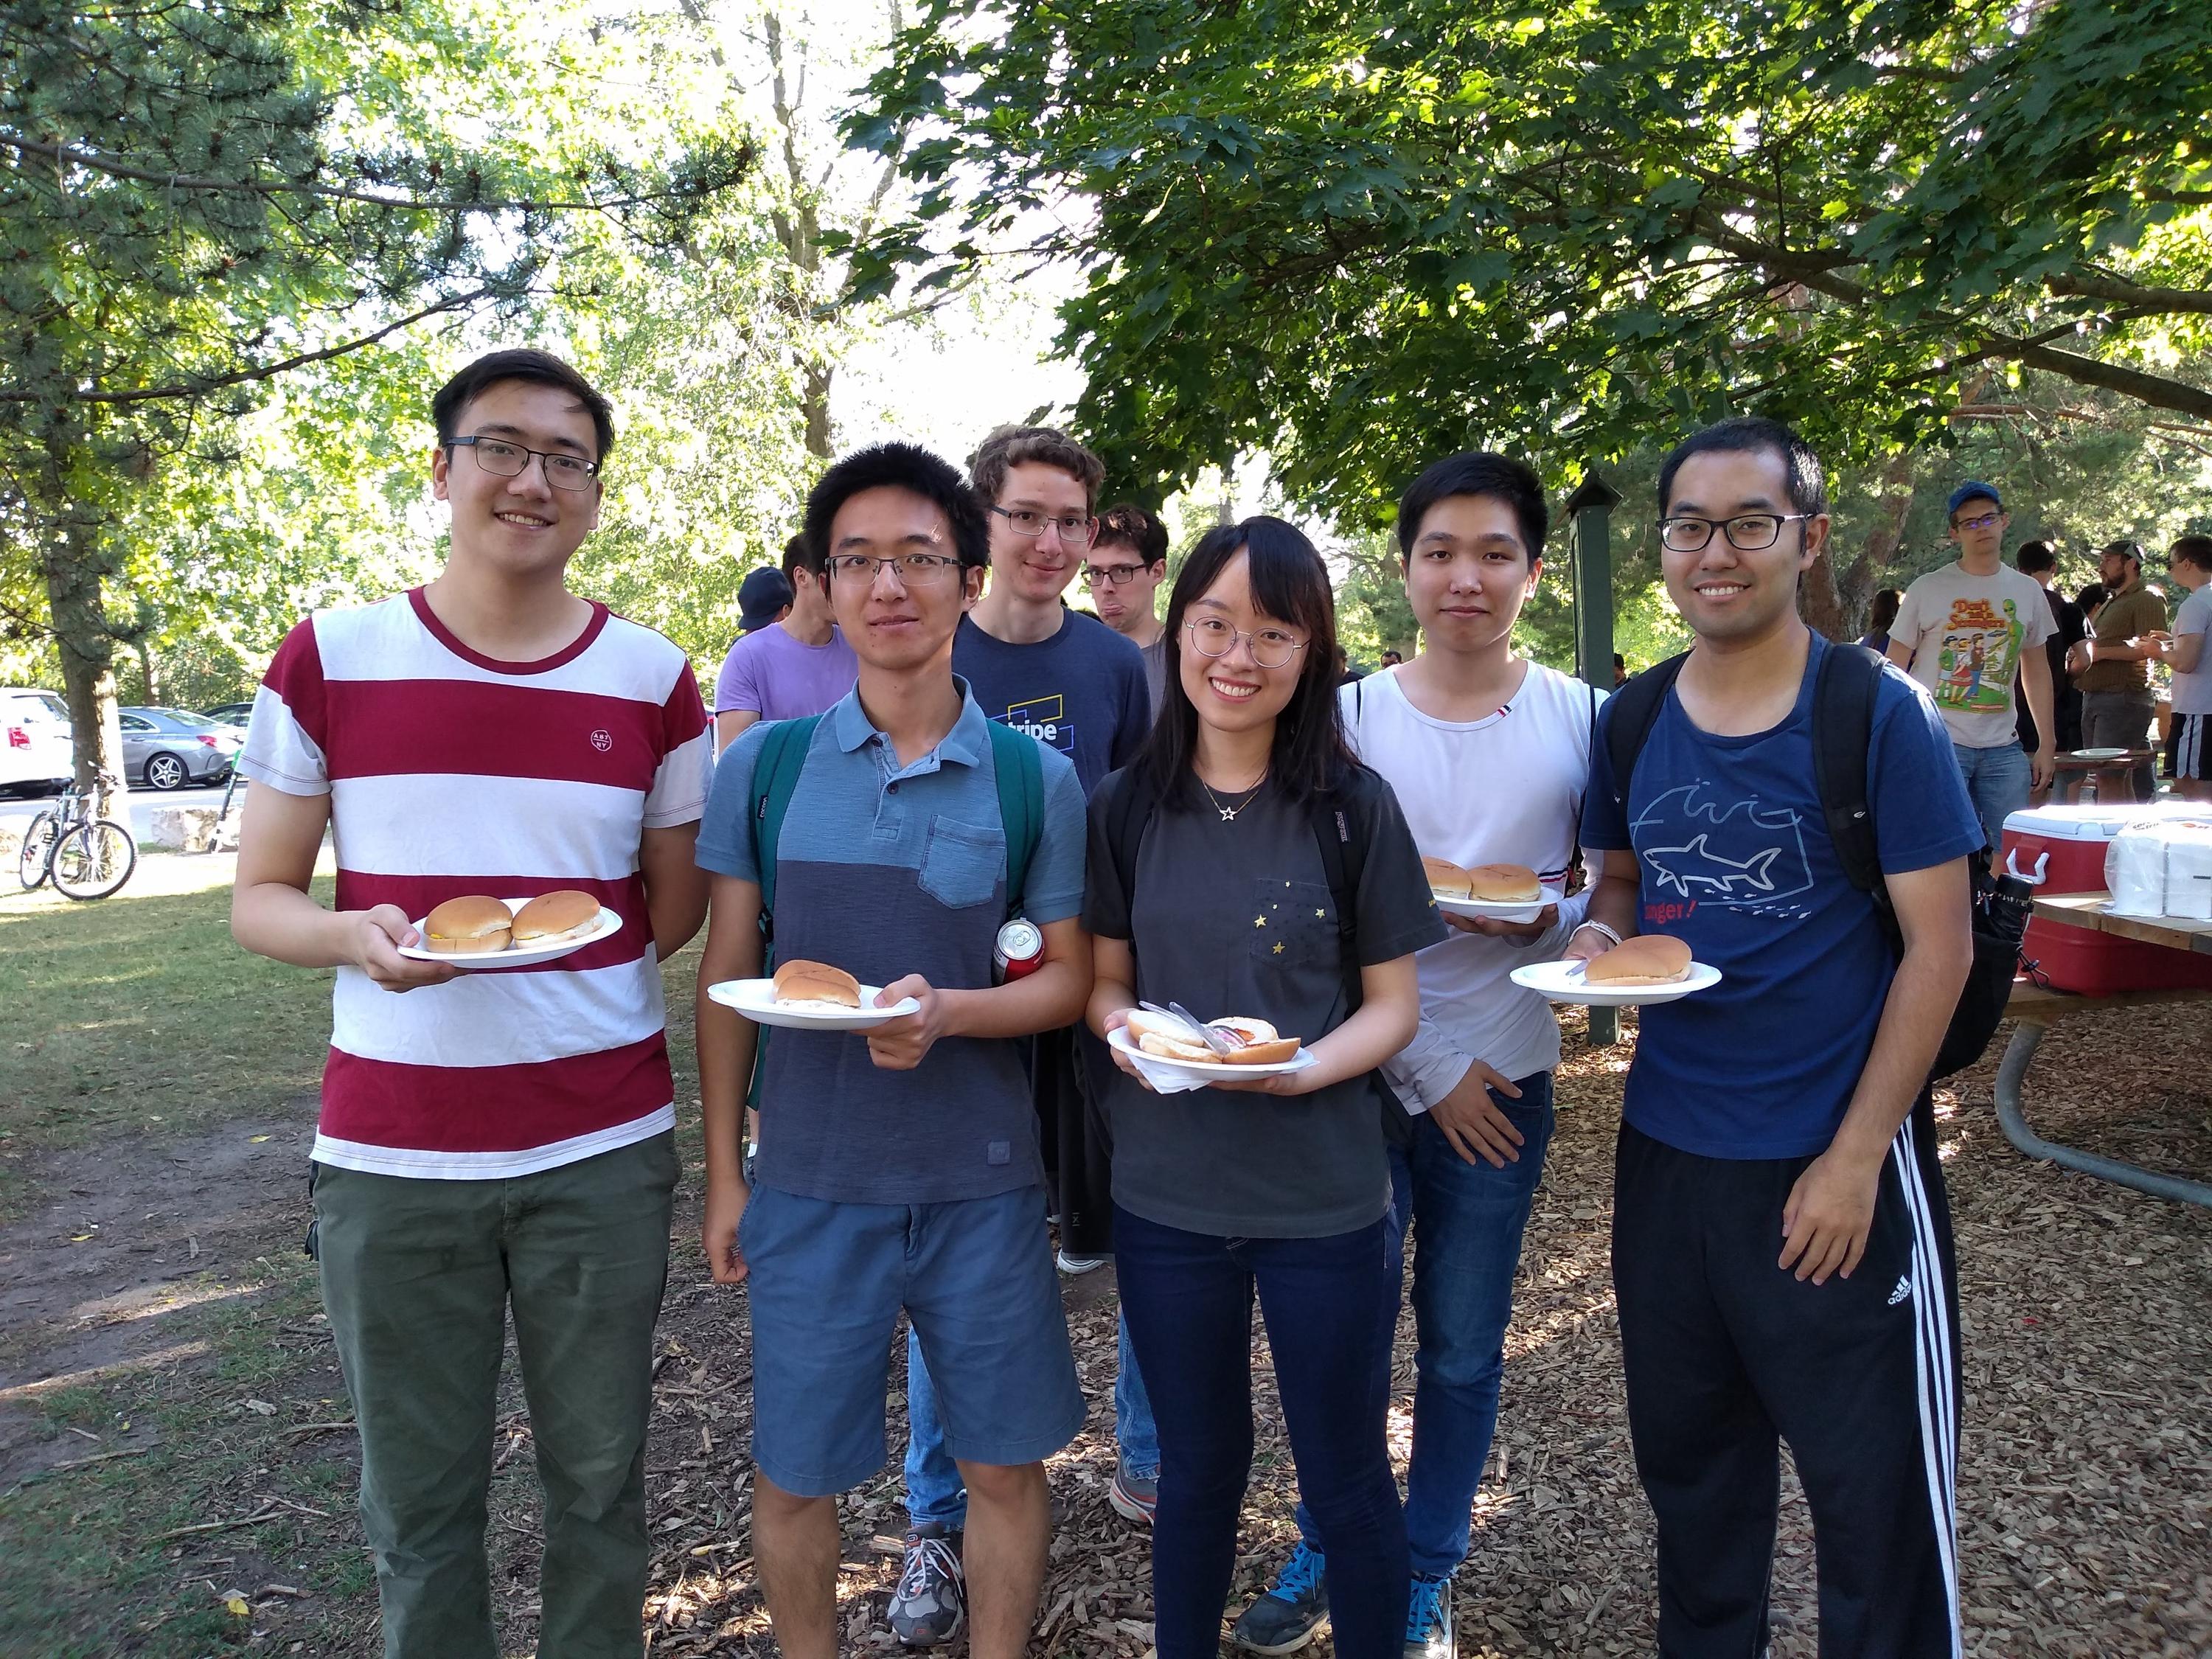 A group of students in the park holding plates